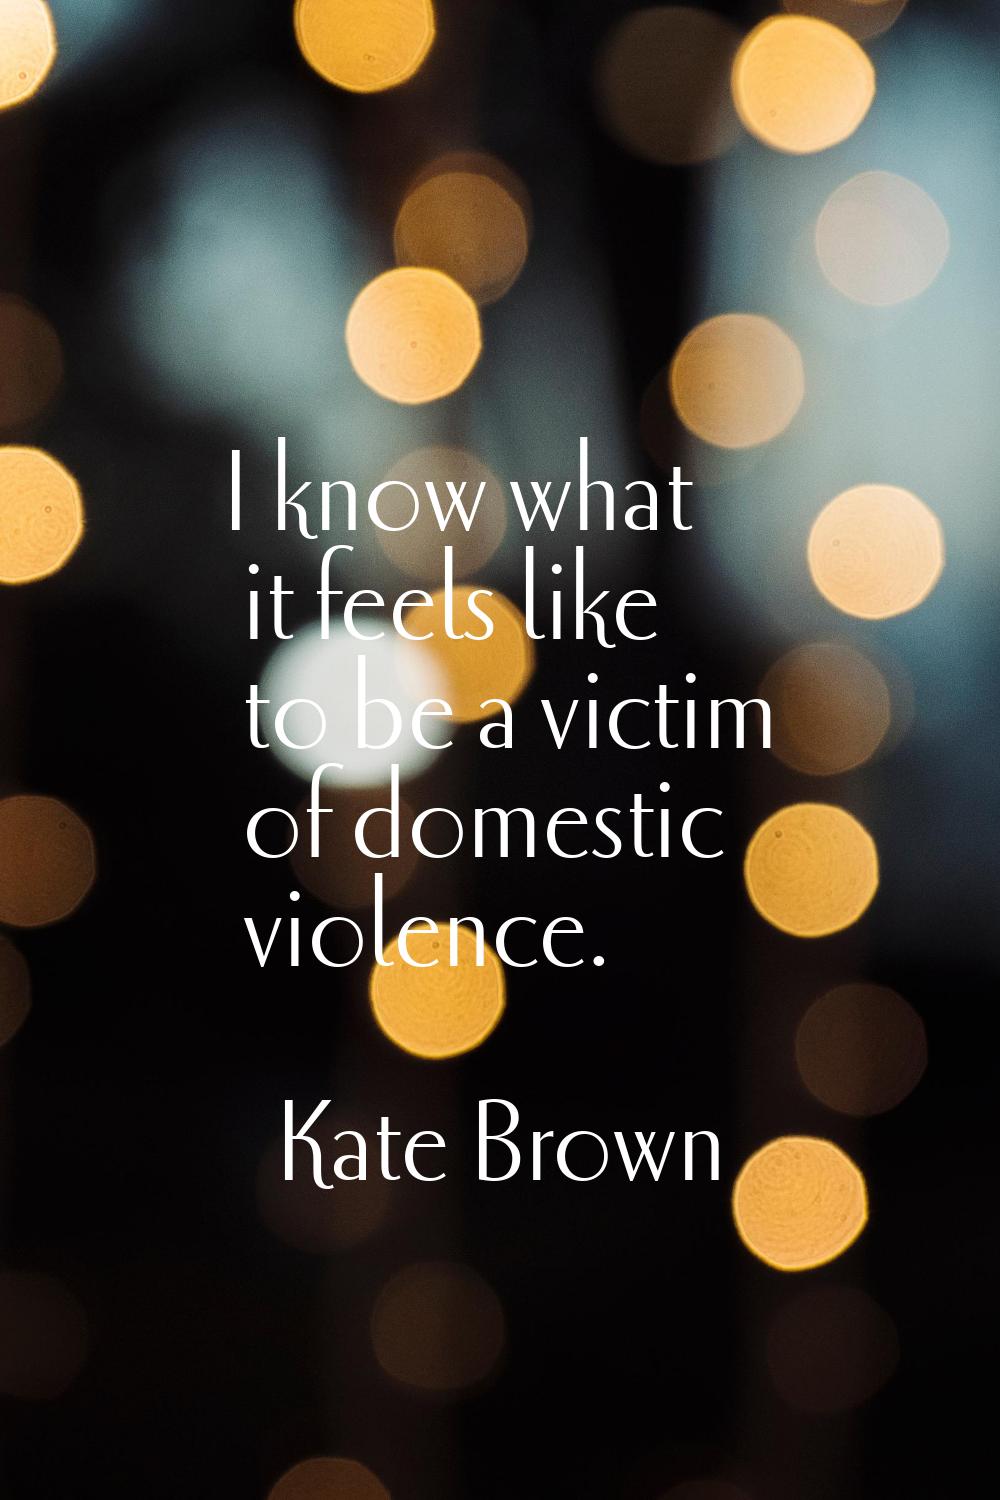 I know what it feels like to be a victim of domestic violence.